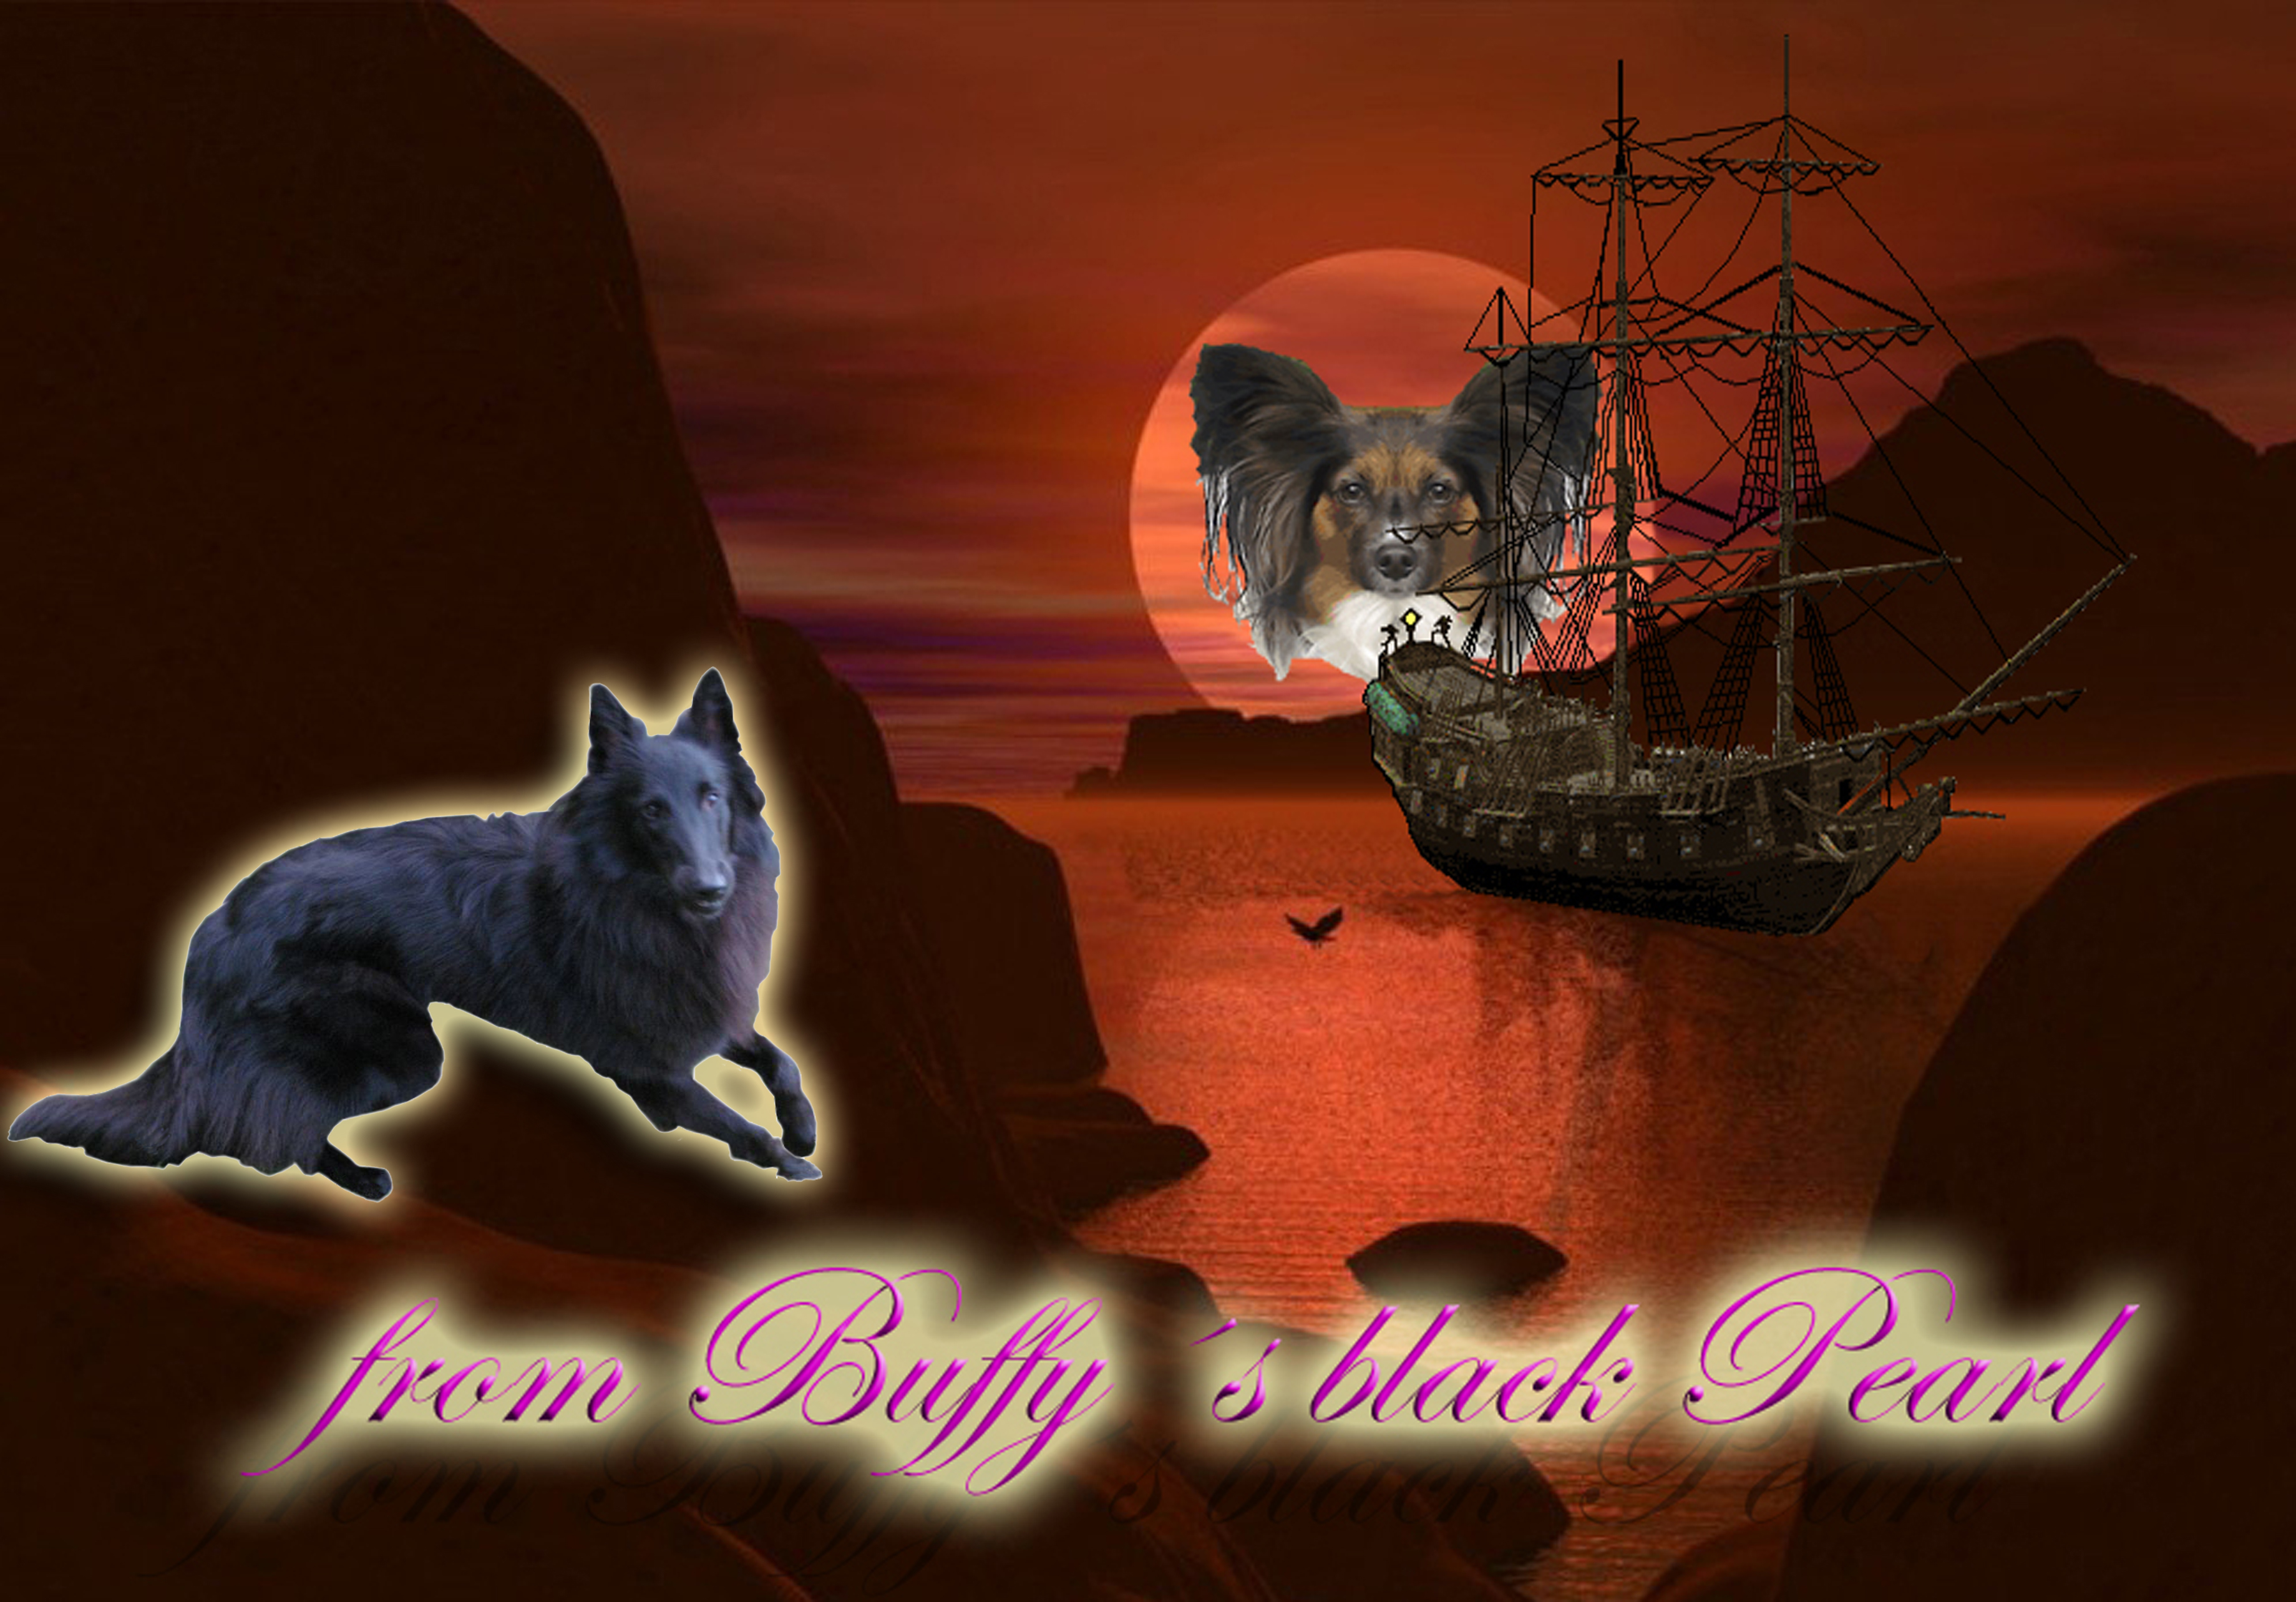 Banner from Buffys black Pearl mit Evolet Fahne